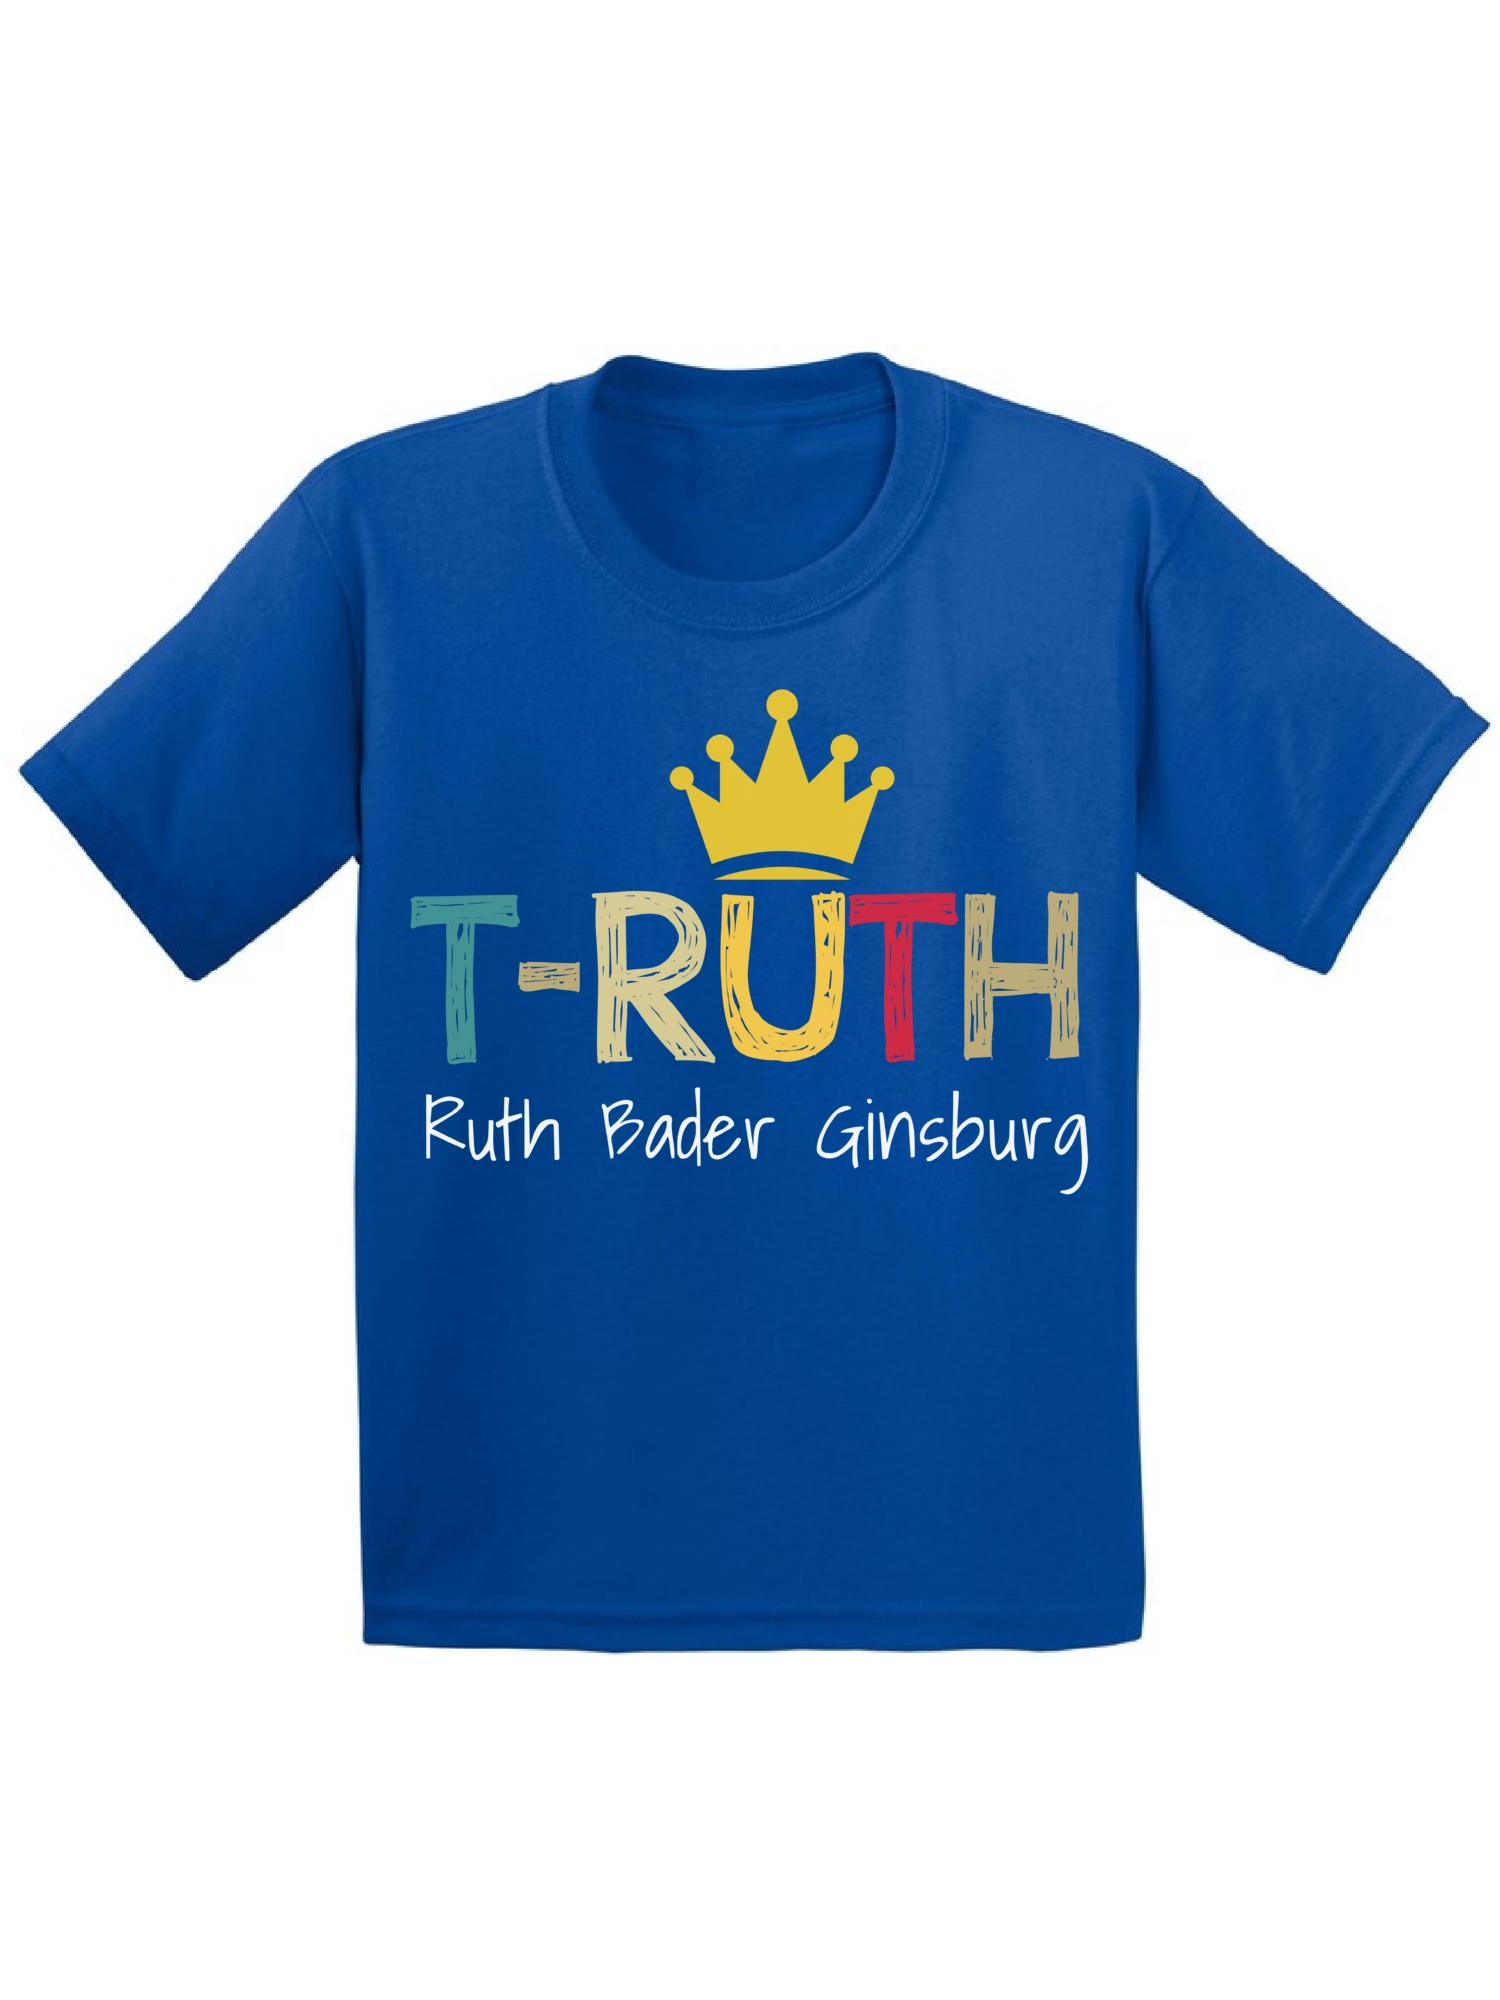 Awkward Styles Ruth Bader Ginsburg Shirt for Kids T-RUTH Notorious Shirt RBG T Shirt Youth Support Women Empowerment Youth T-shirt - image 1 of 4